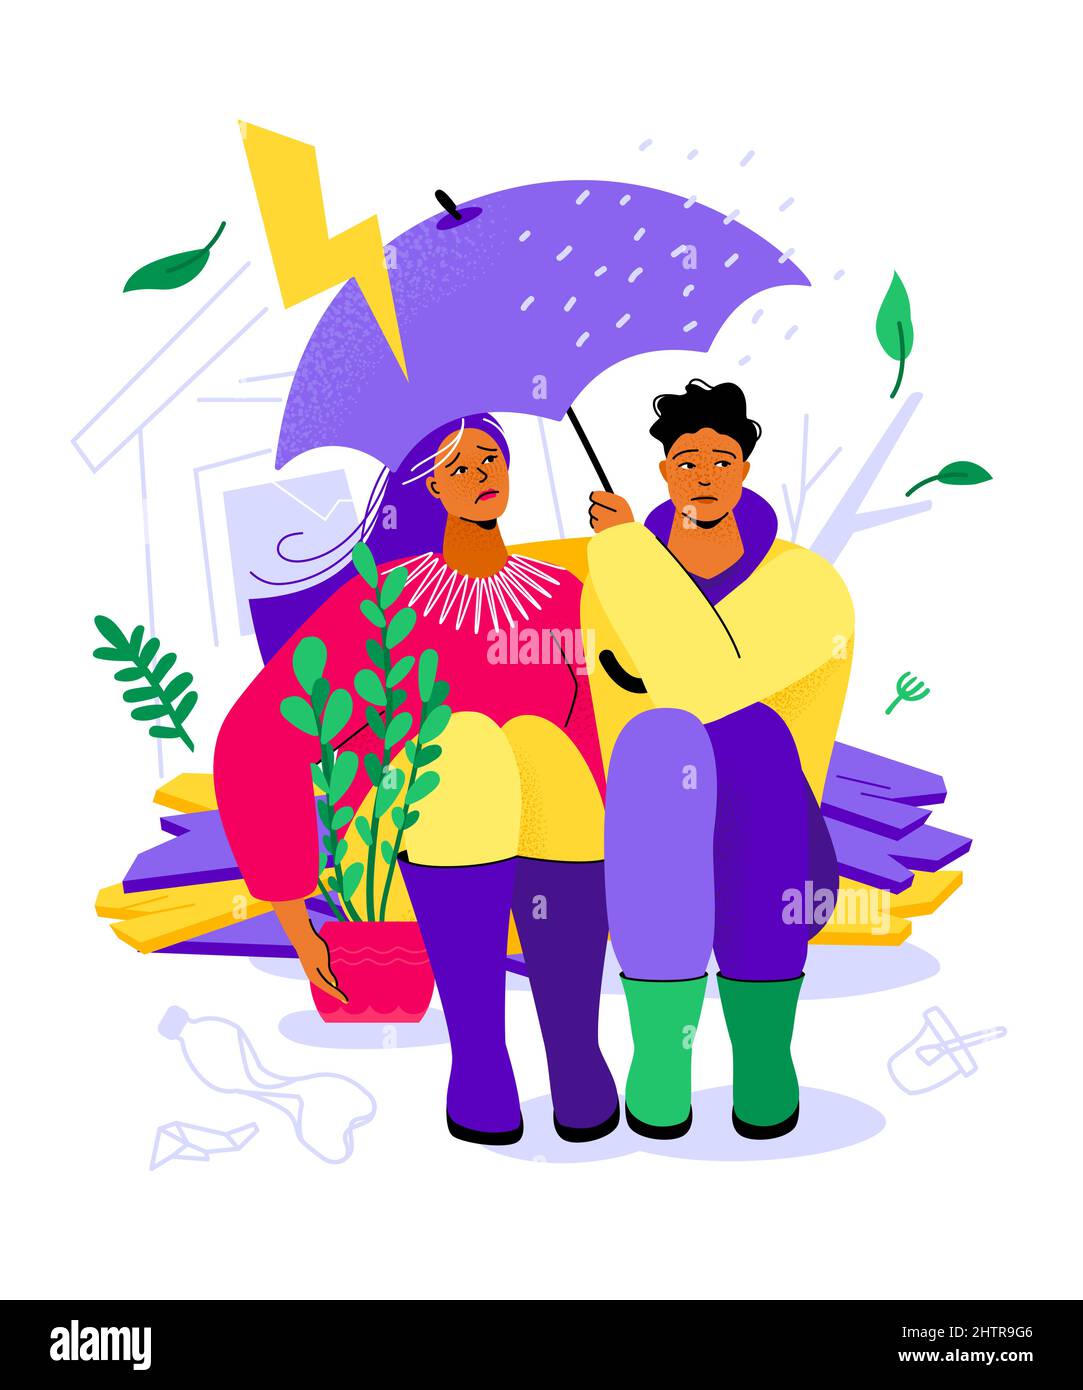 Hurricane deals damage - colorful flat design style illustration with cartoon characters. A young couple is hiding under an umbrella from the rain and Stock Vector